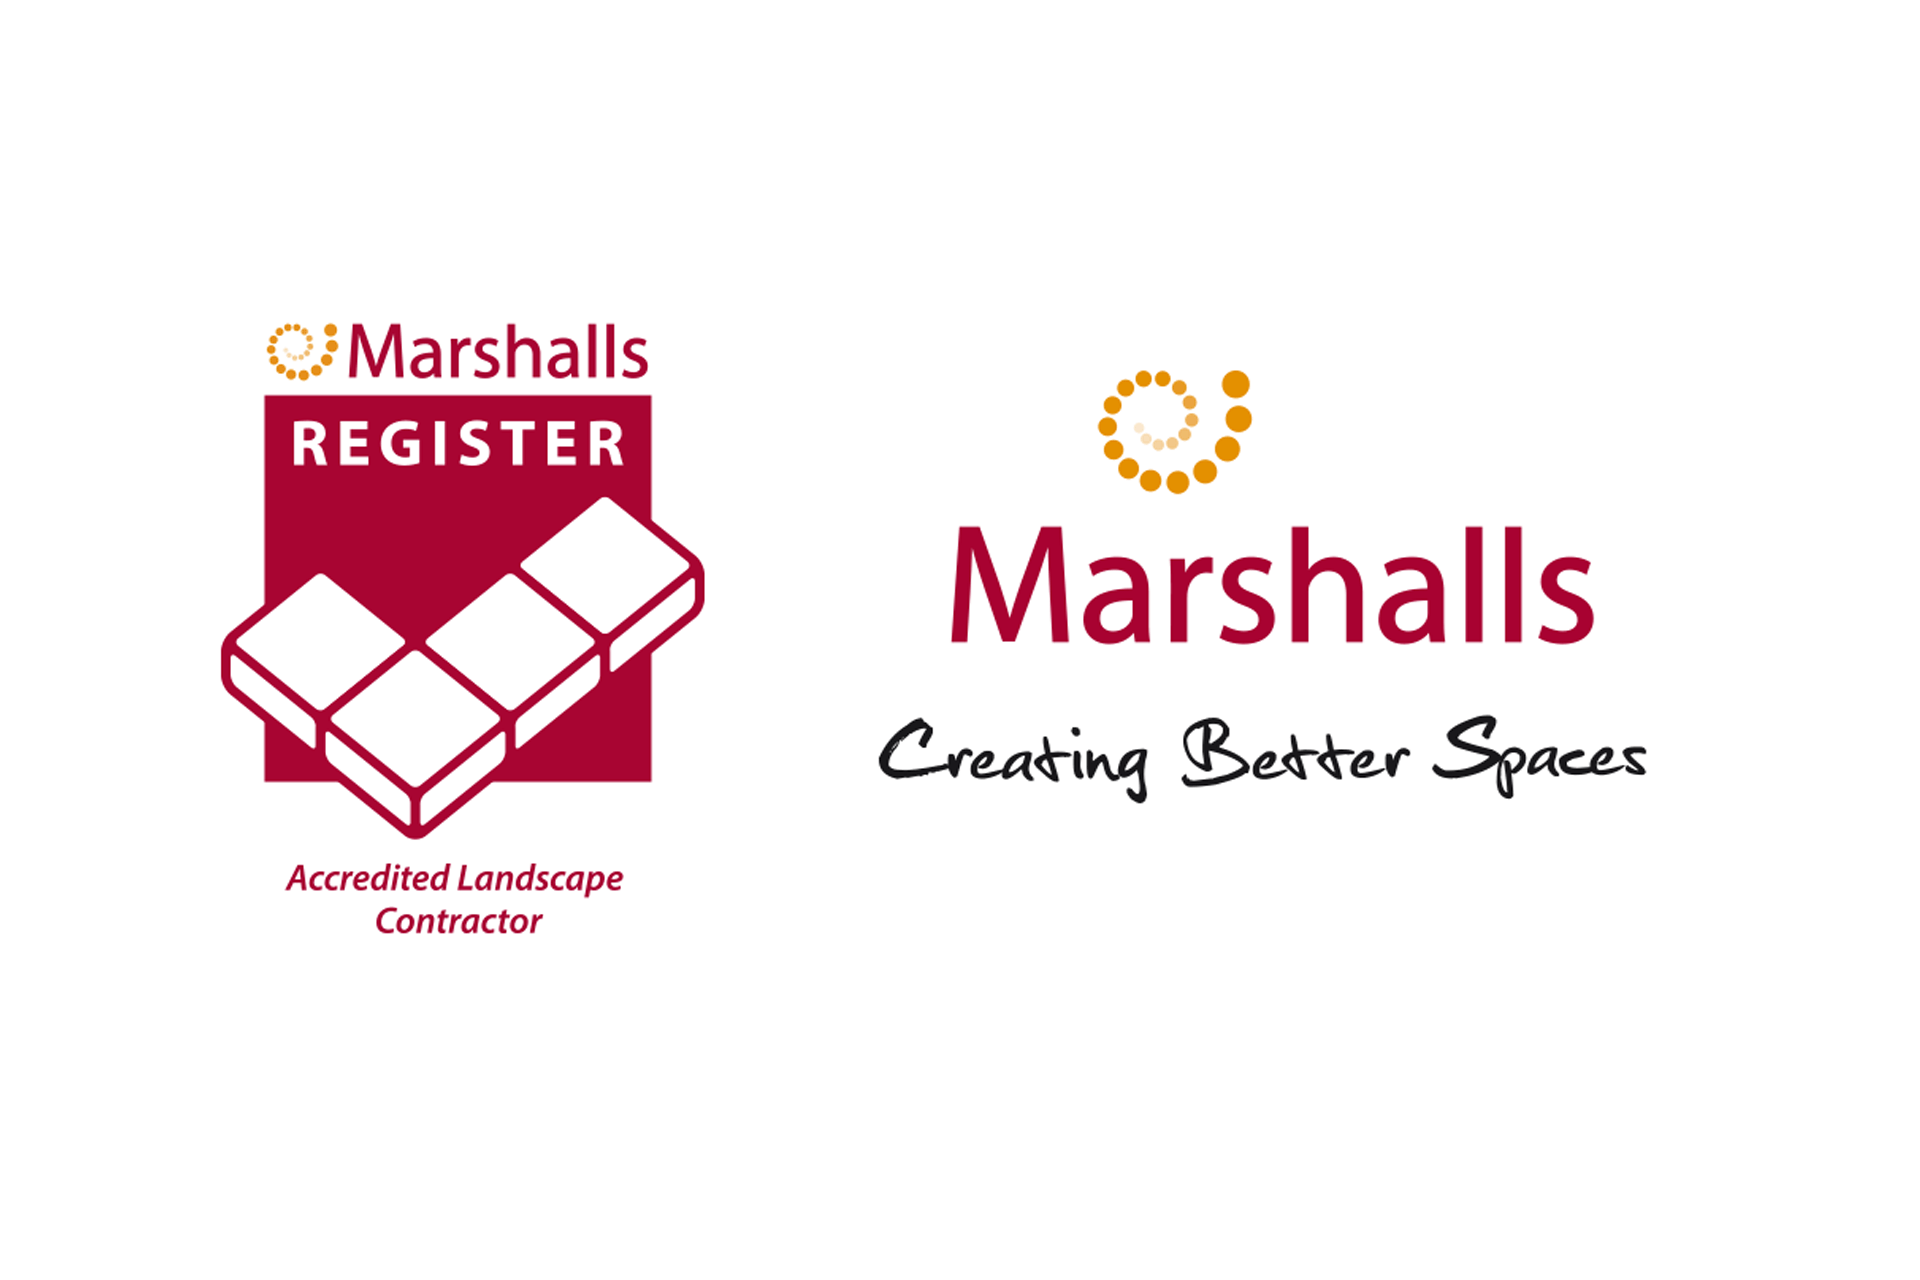 Marshalls Register - Accredited Landscape Contractor